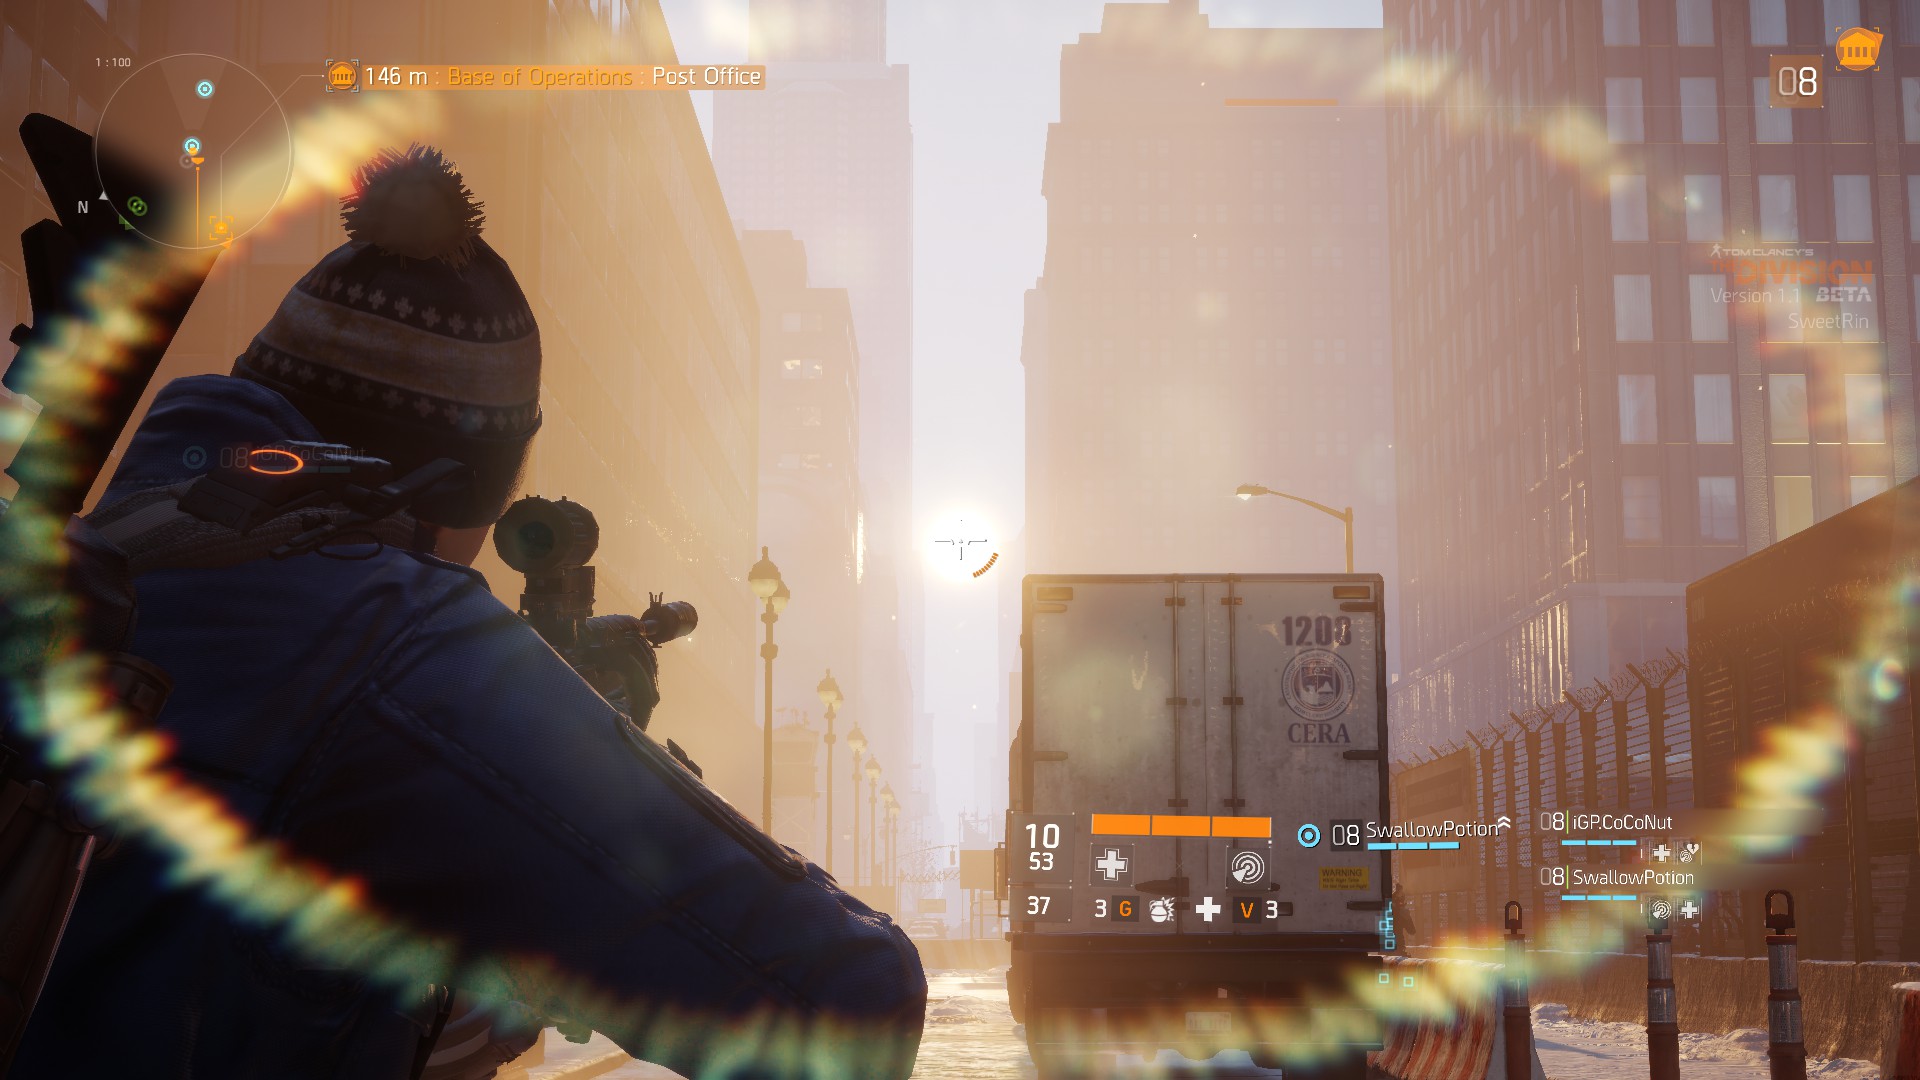 Tom Clancy's The Division Beta2016-2-21-3-21-52.jpg